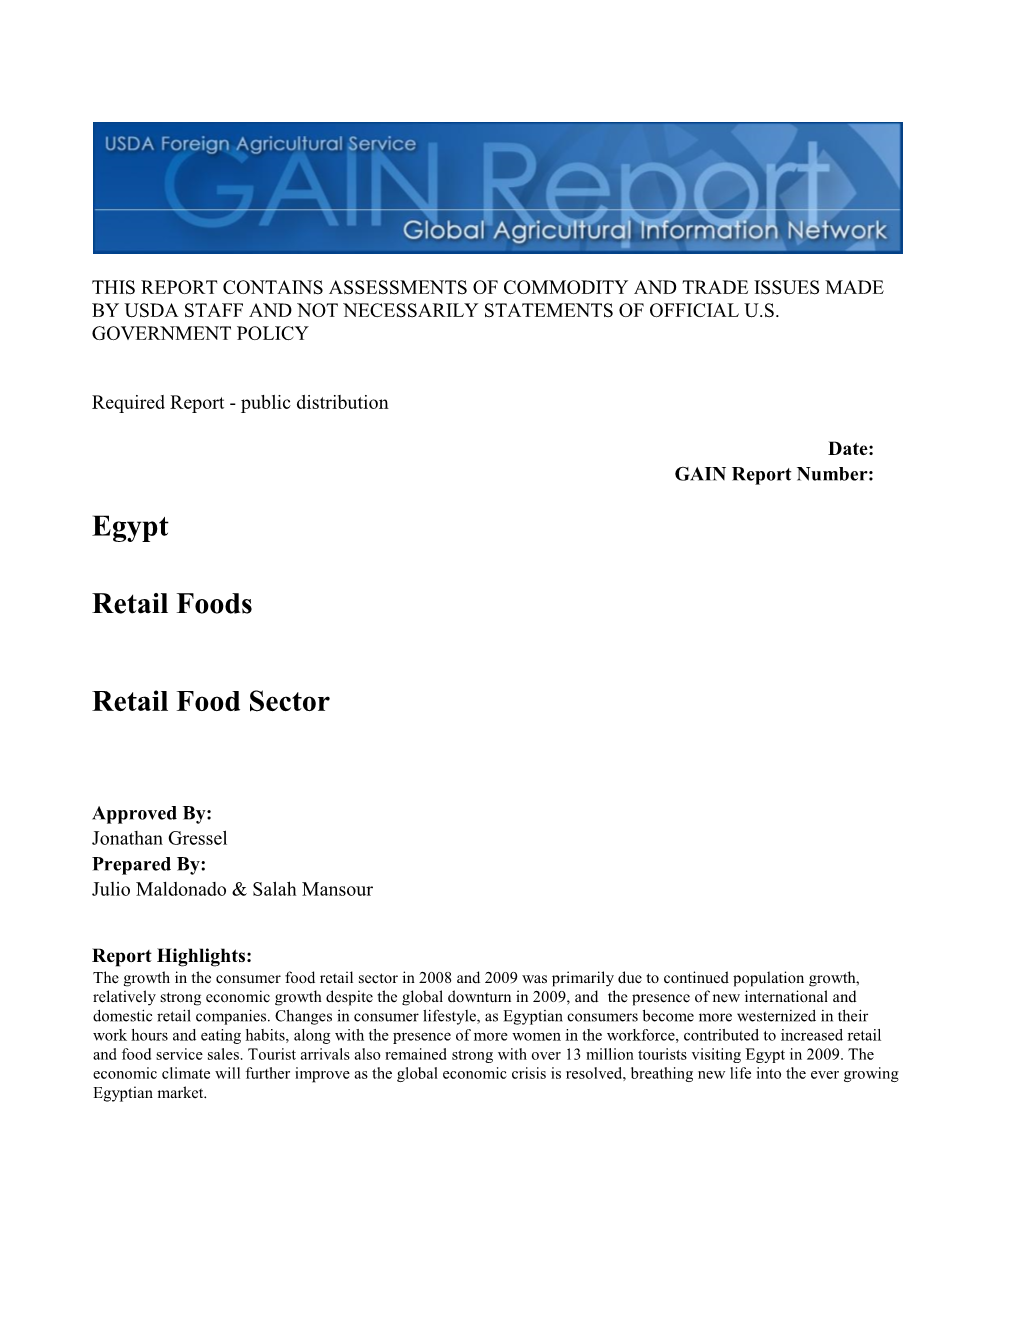 Egypt Retail Foods Retail Food Sector